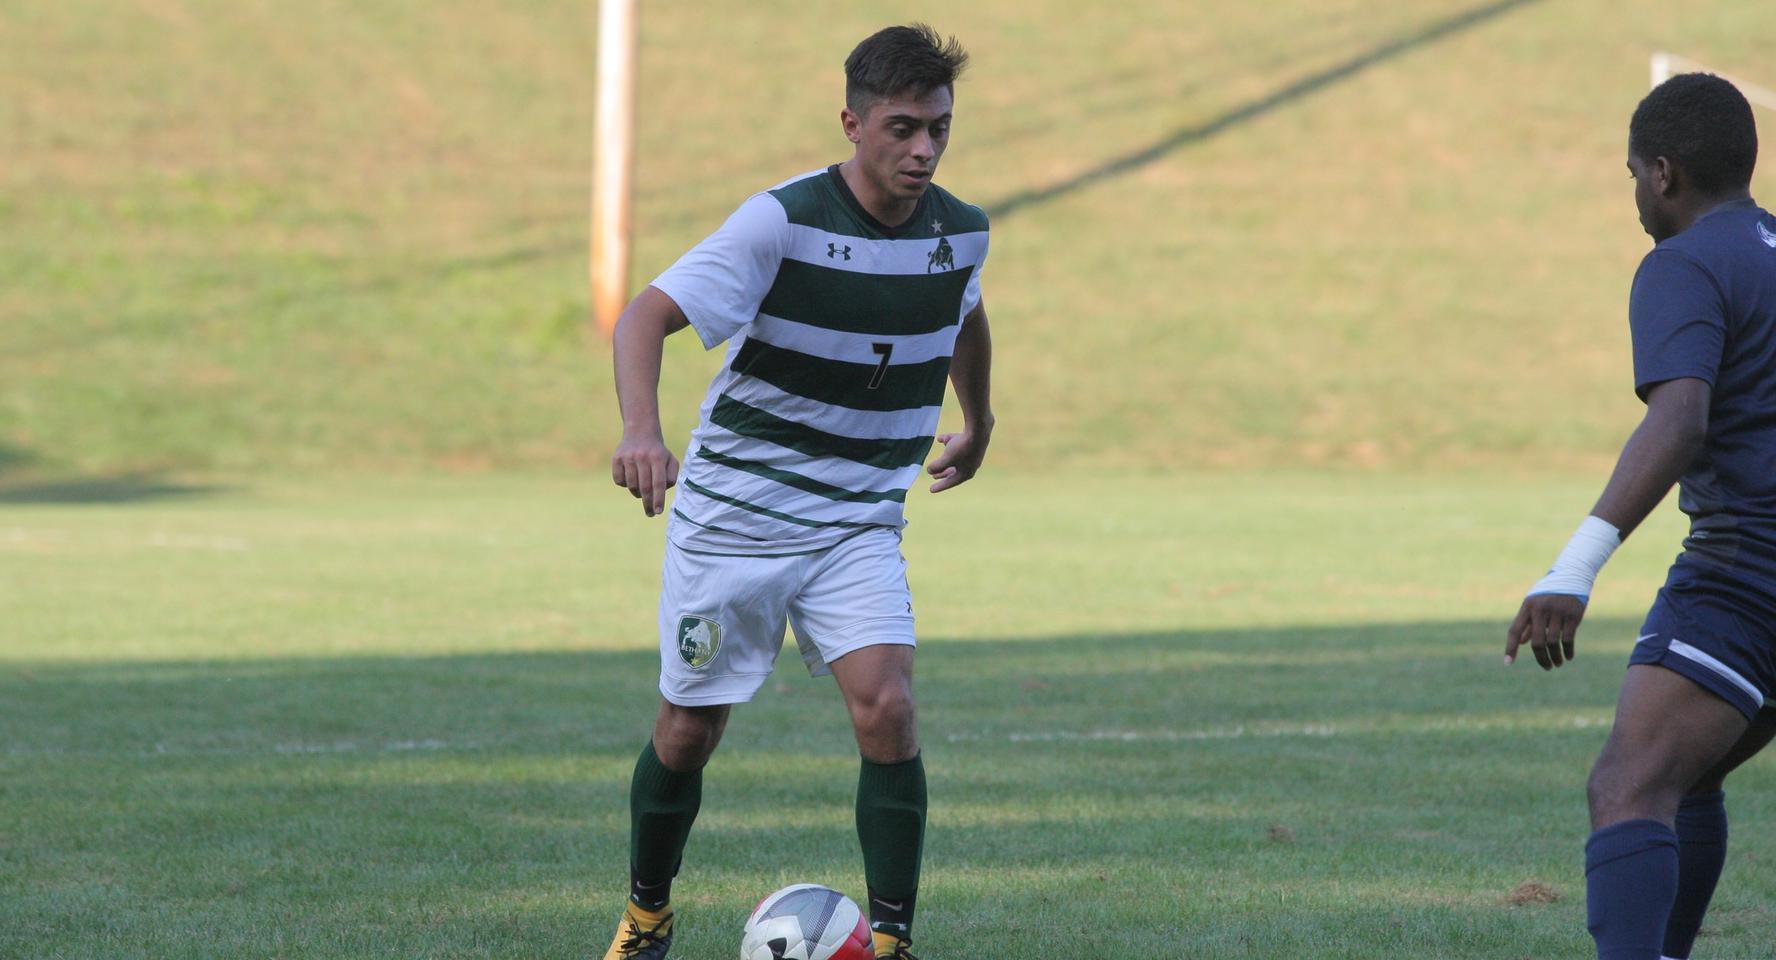 Men's soccer finishes in a draw with Thiel, 1-1